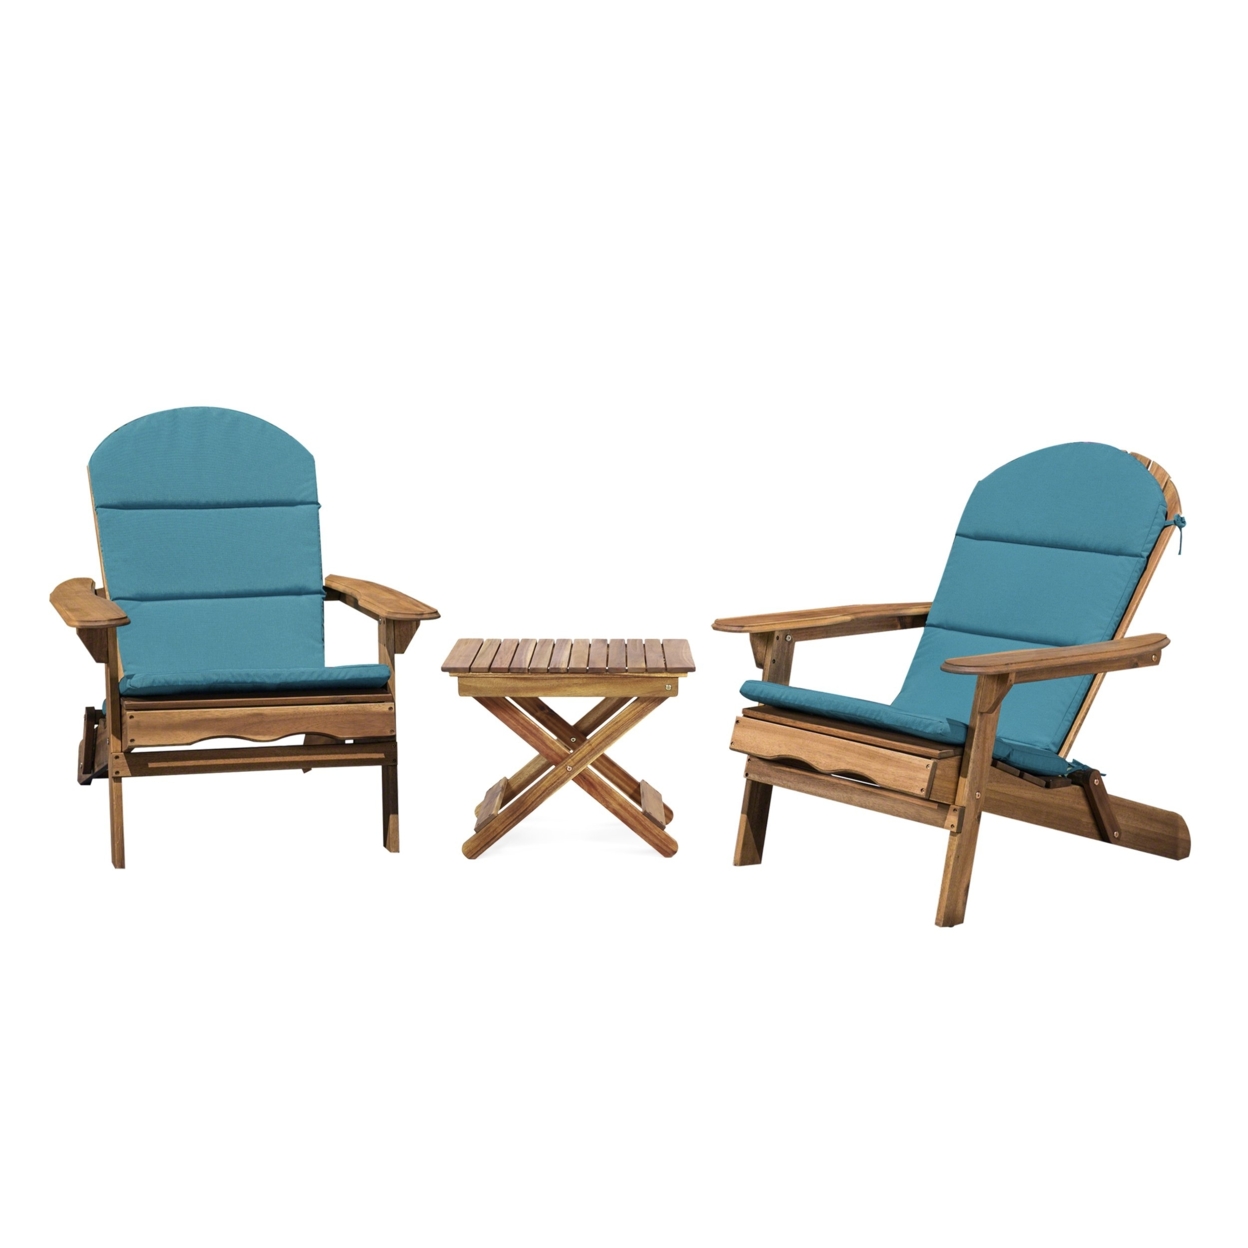 Reed Outdoor 2 Seater Acacia Wood Chat Set With Water Resistant Cushions - Navy Blue/navy Blue